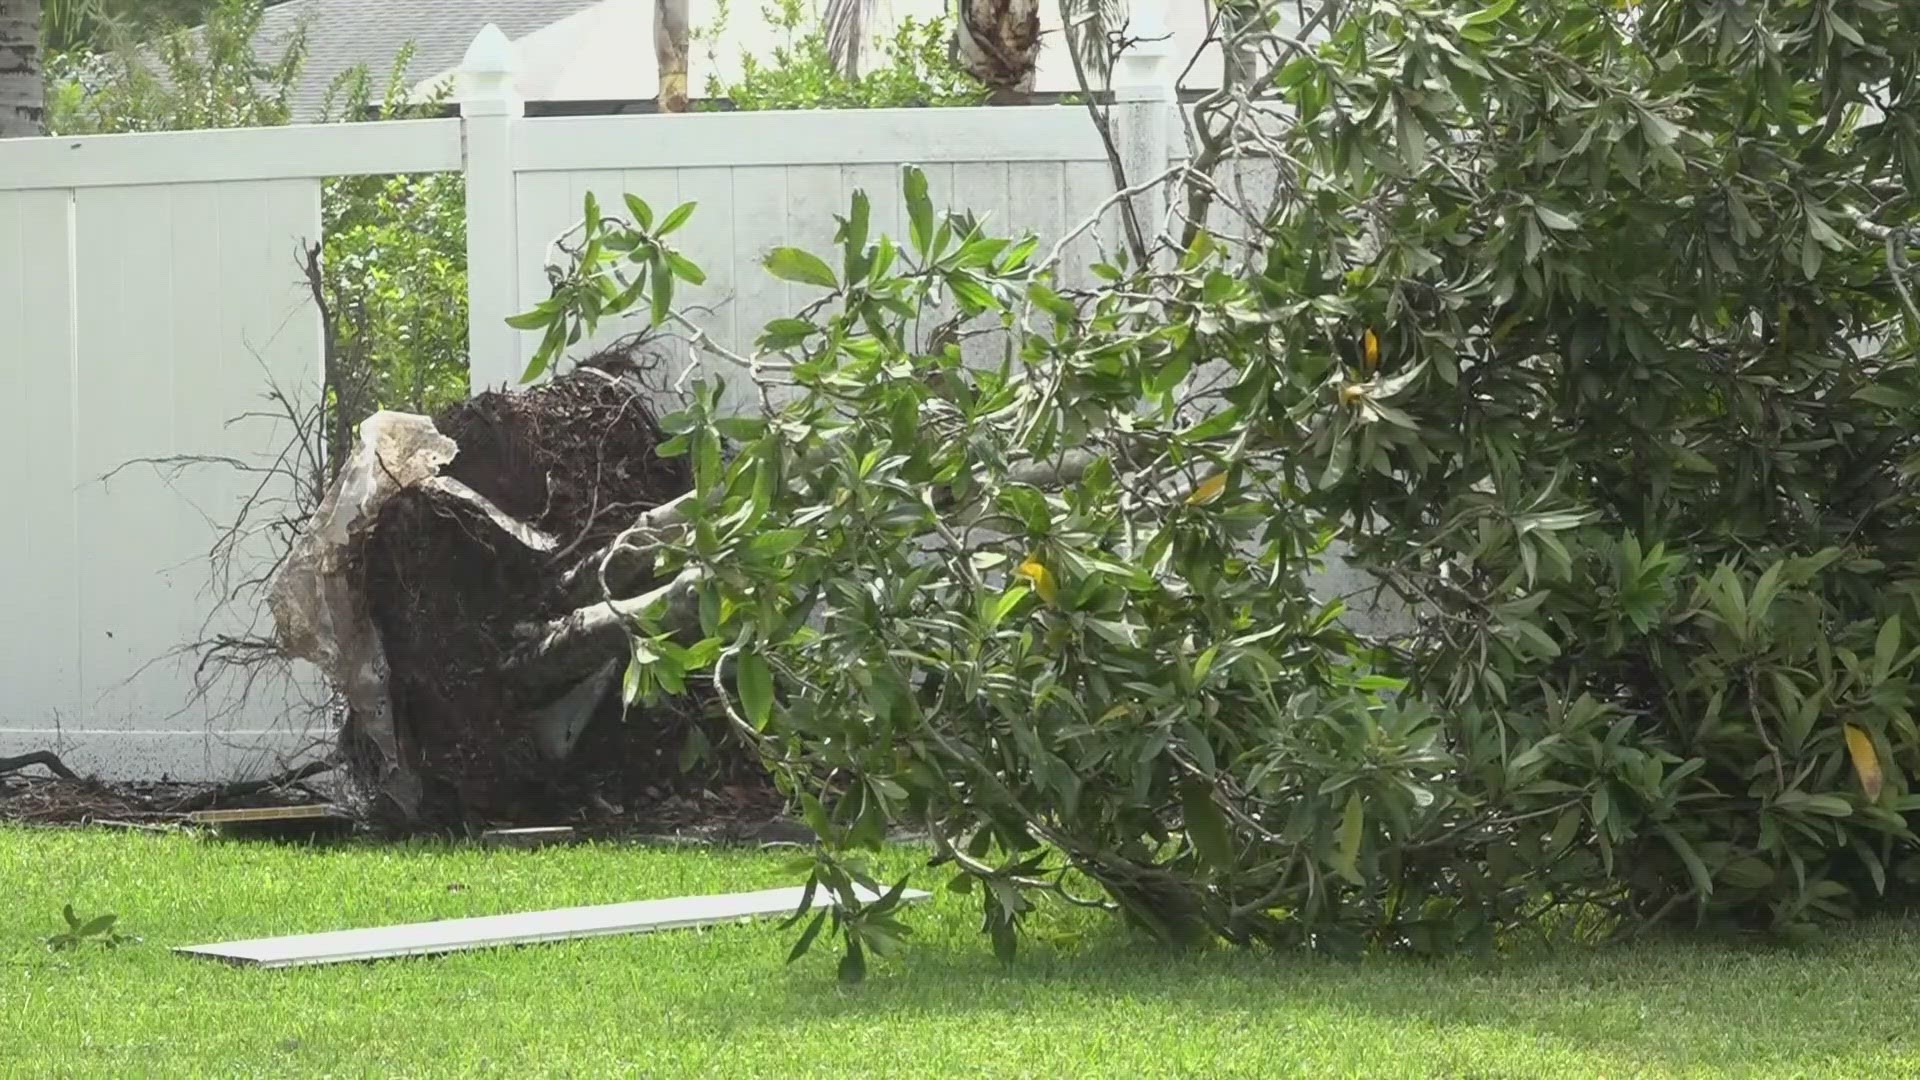 A tornado touched down in the Indian trail section of Palm Coast at about 4:45 a.m. on Thursday, according to the National Weather Service.